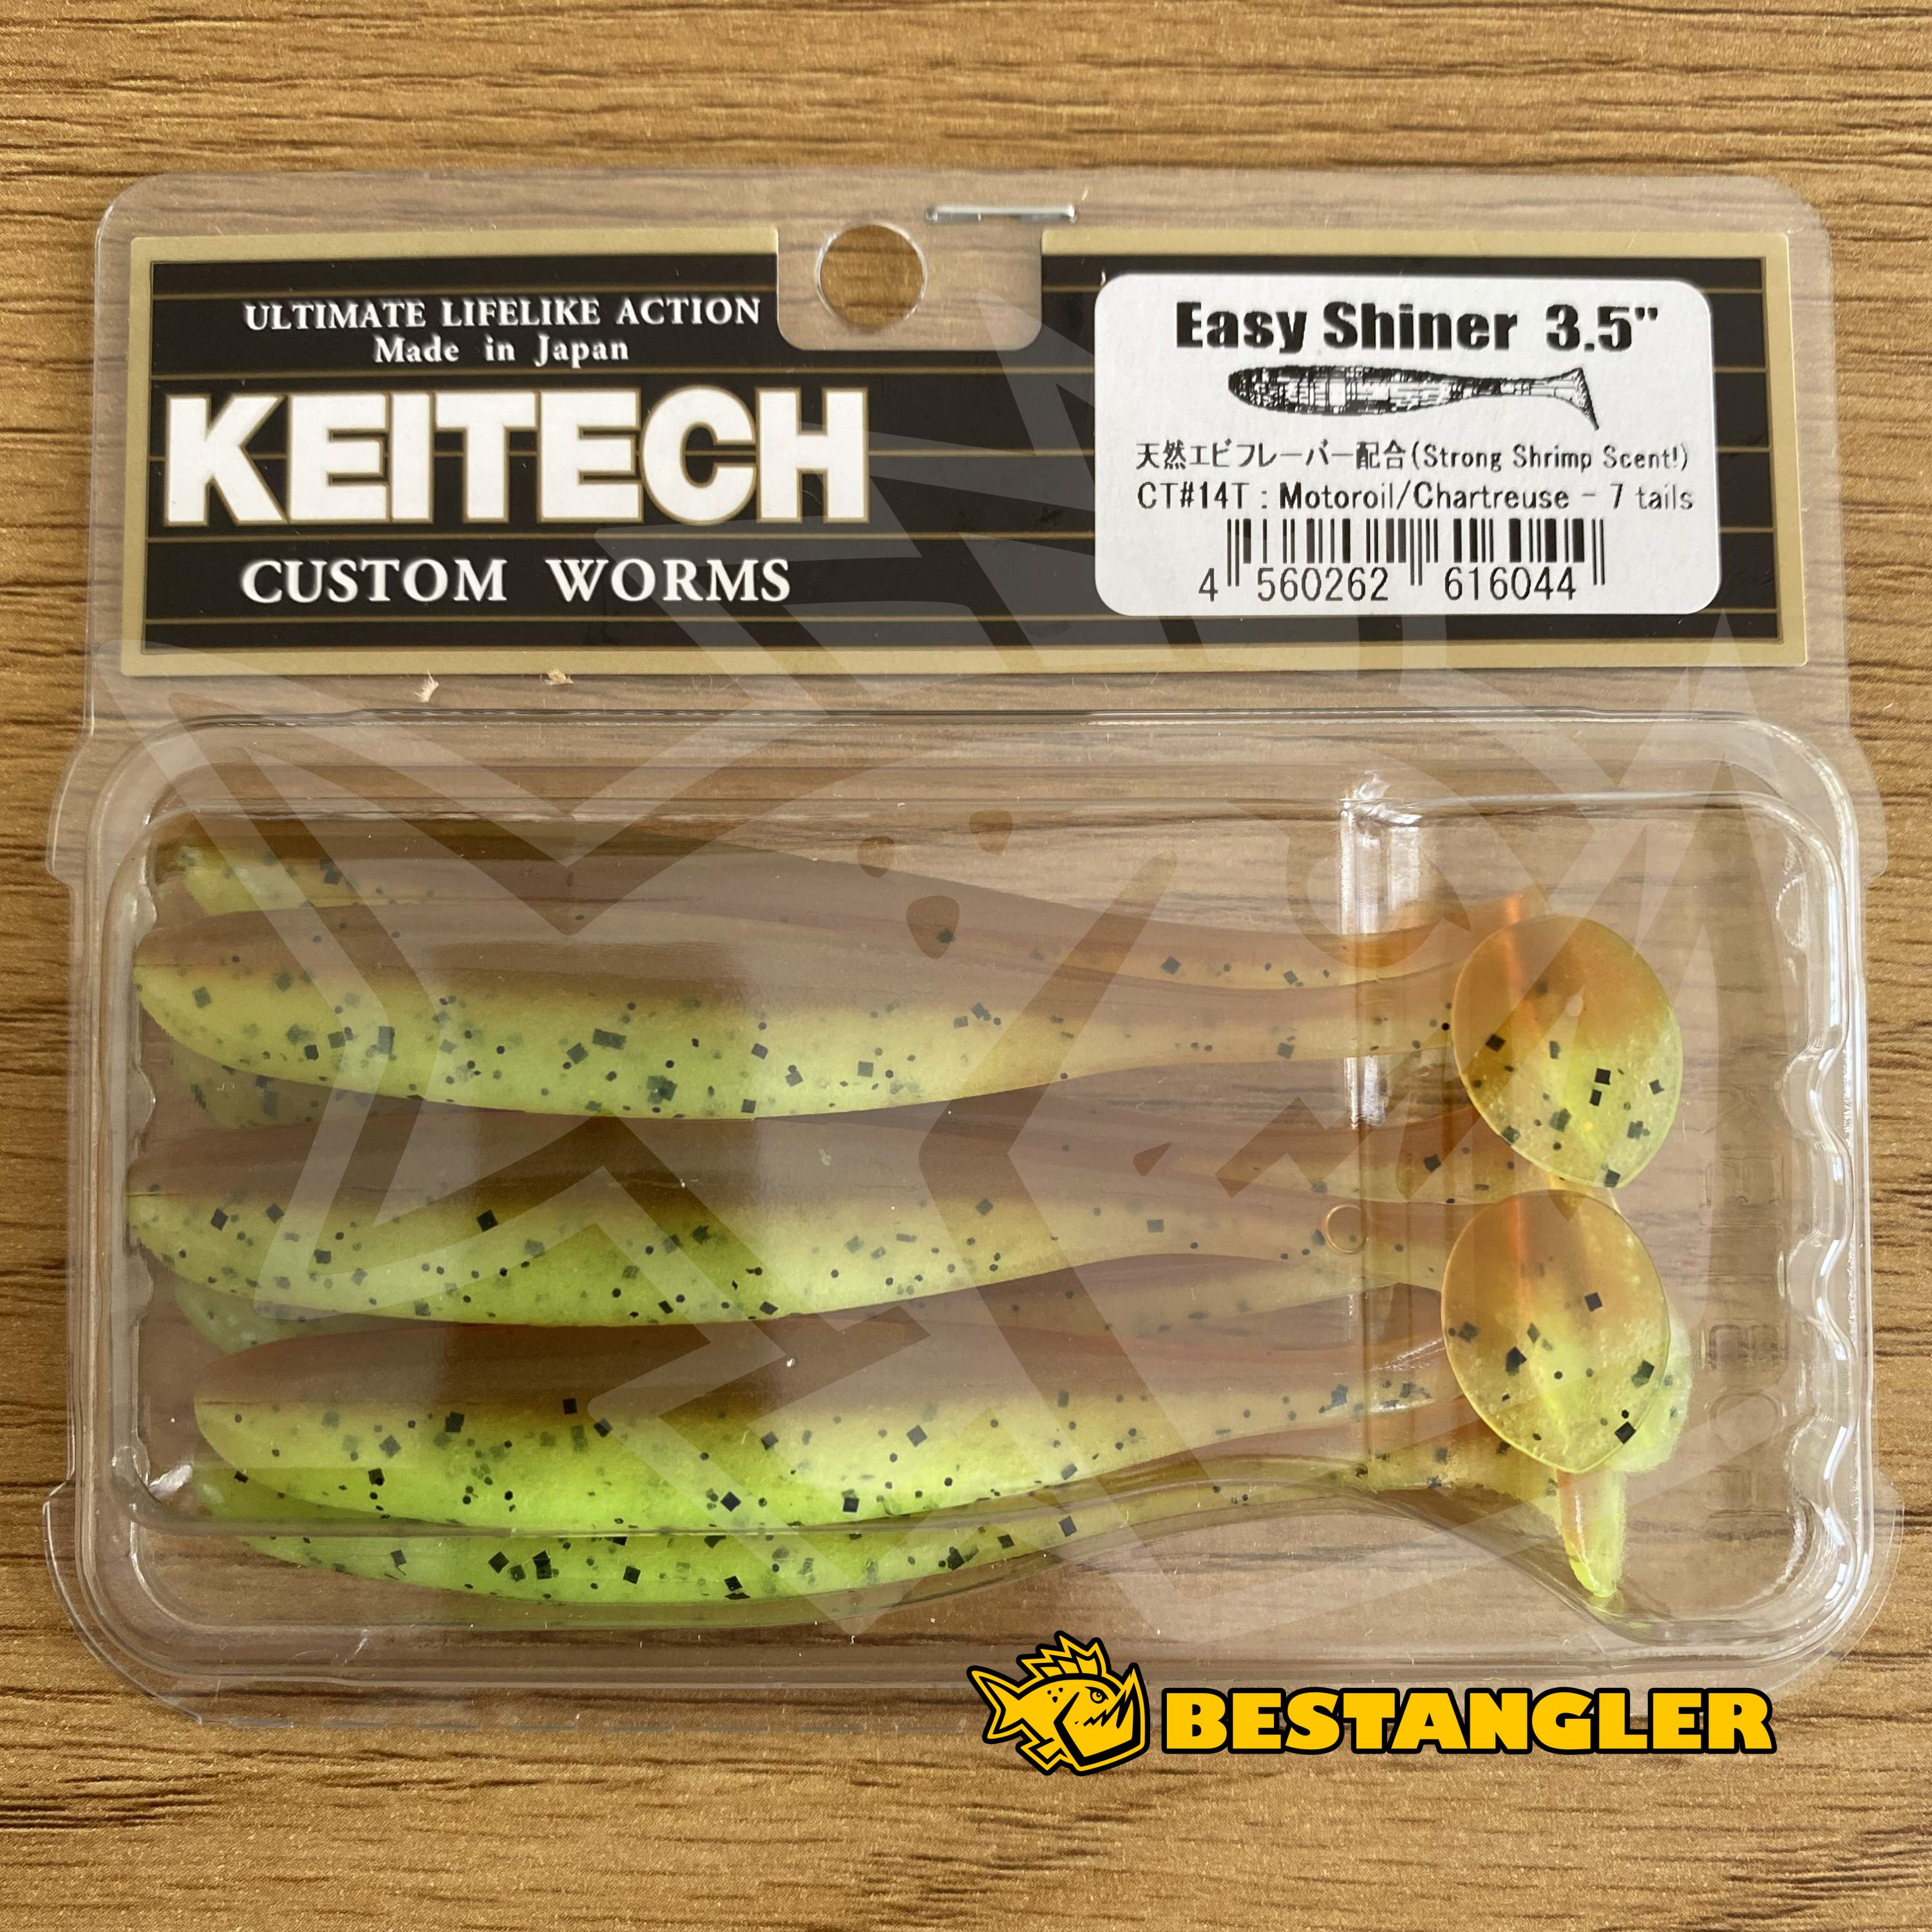 Keitech Easy Shiner] The best of the best. [Review and fish] 